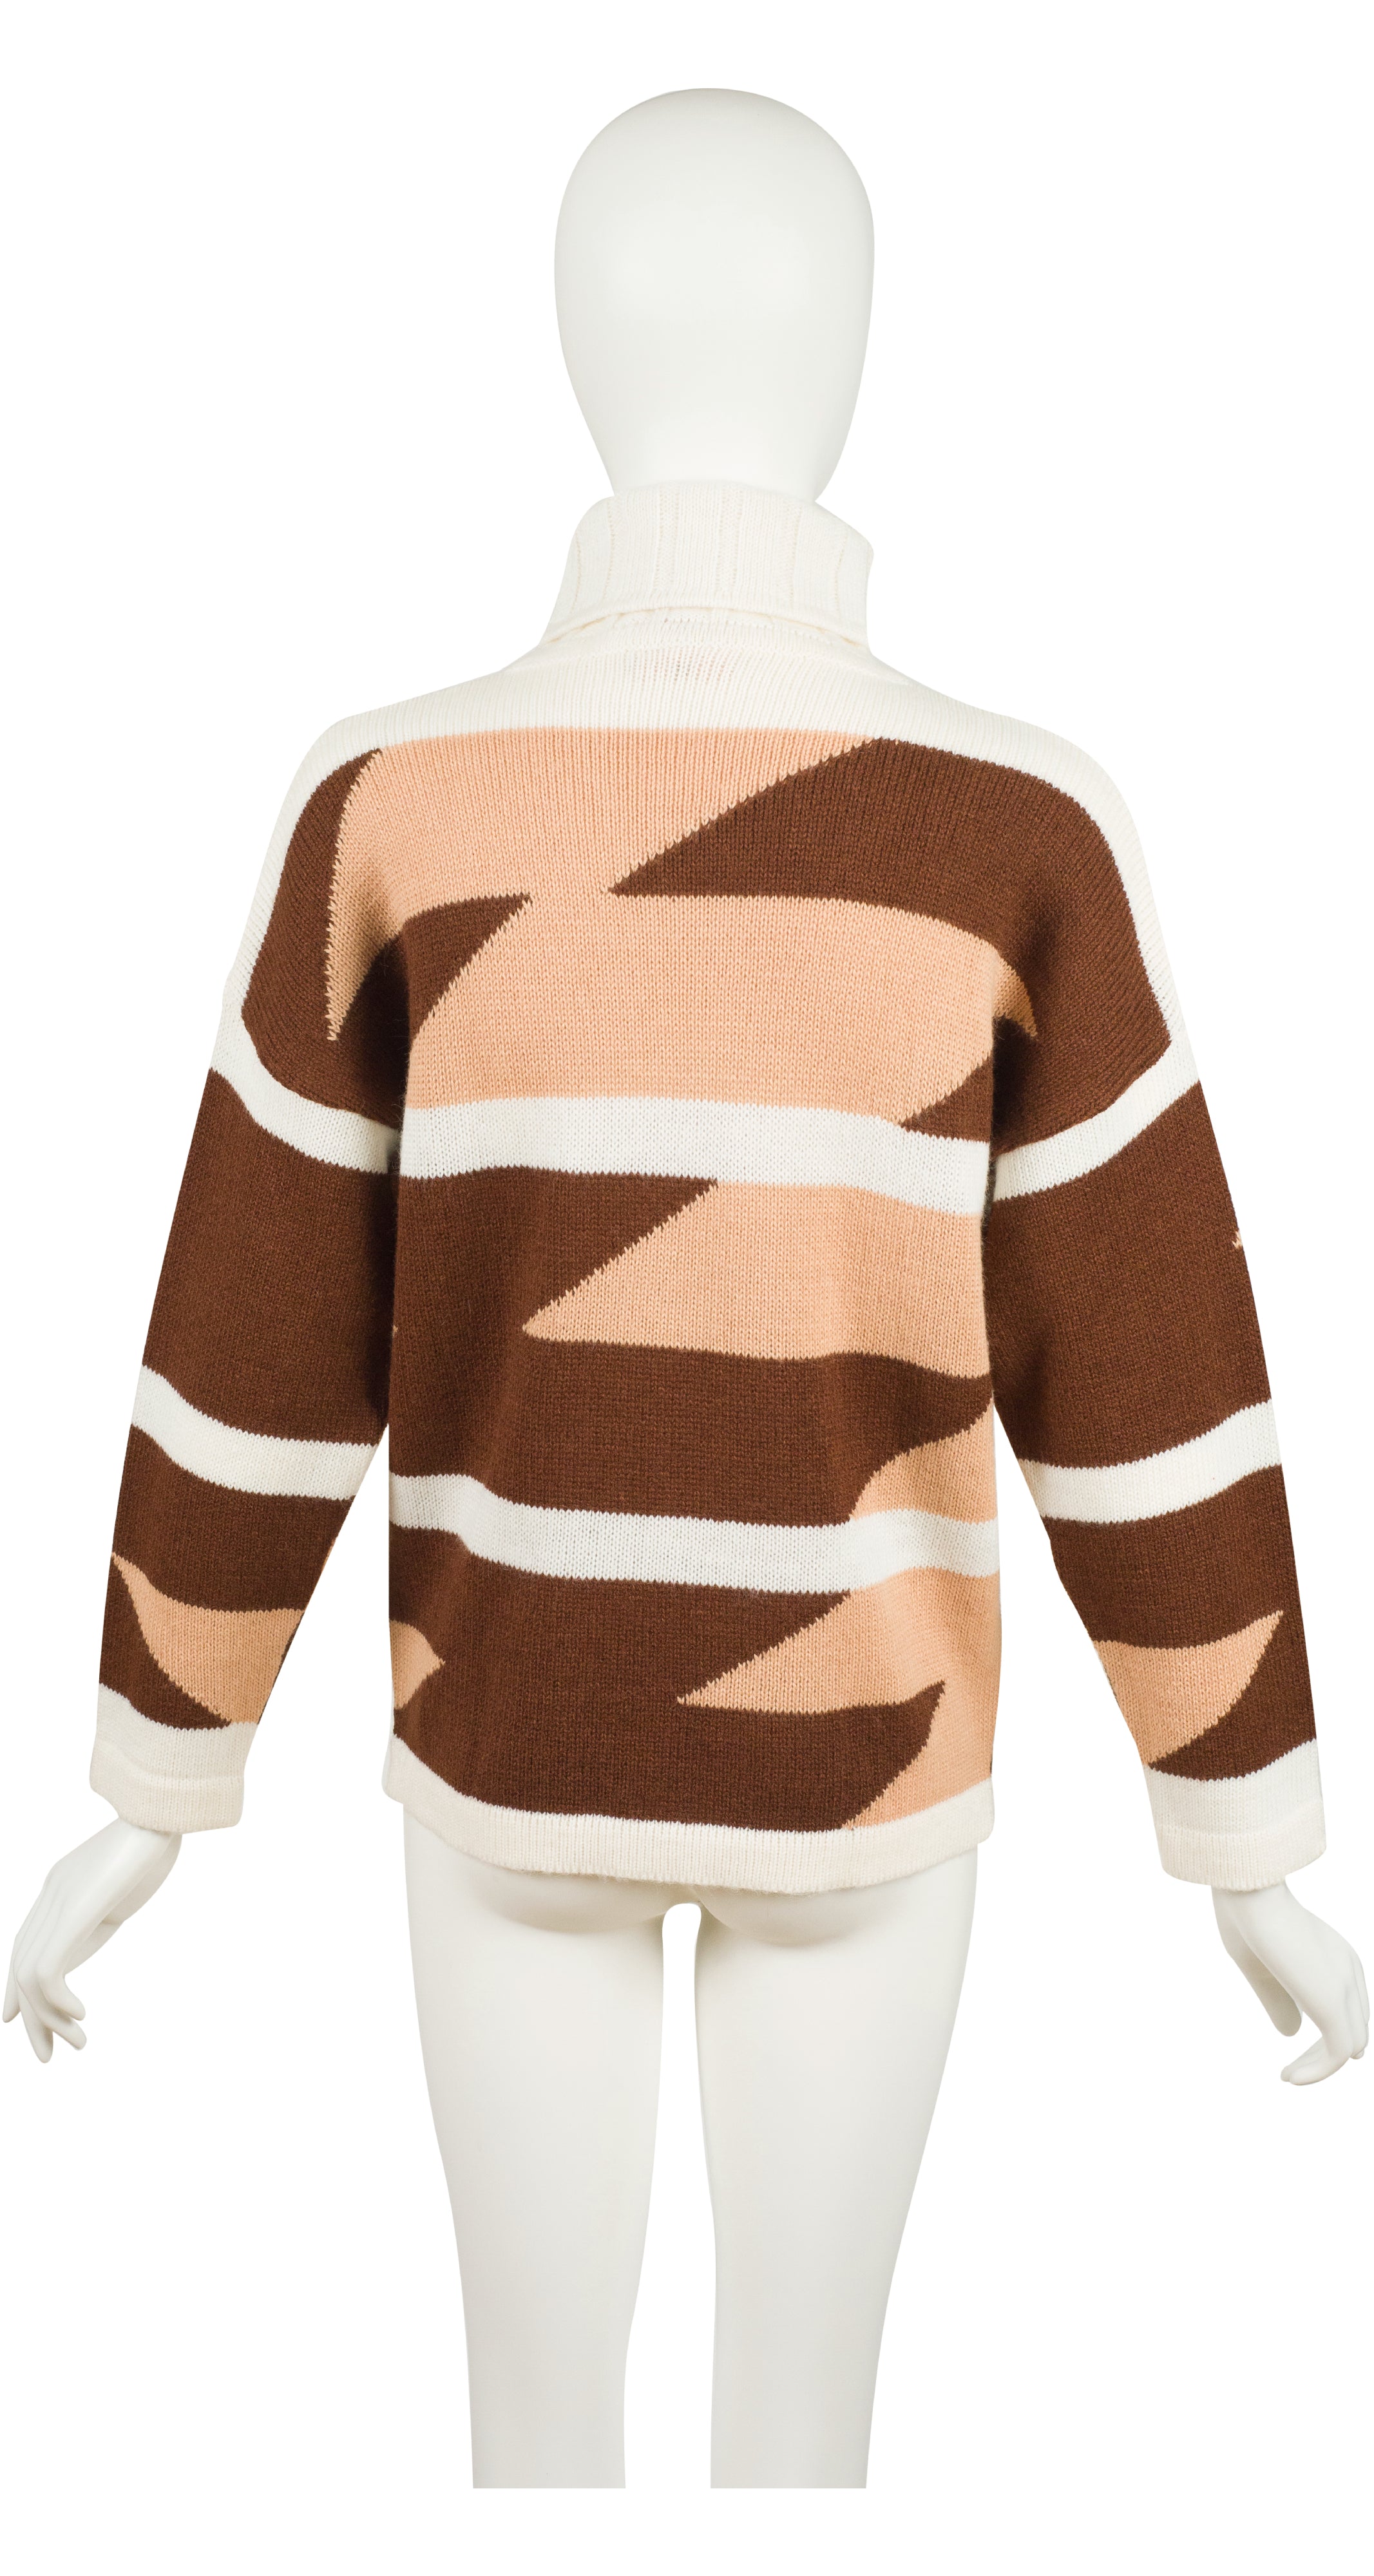 1970s Brown & White Graphic Turtleneck Sweater